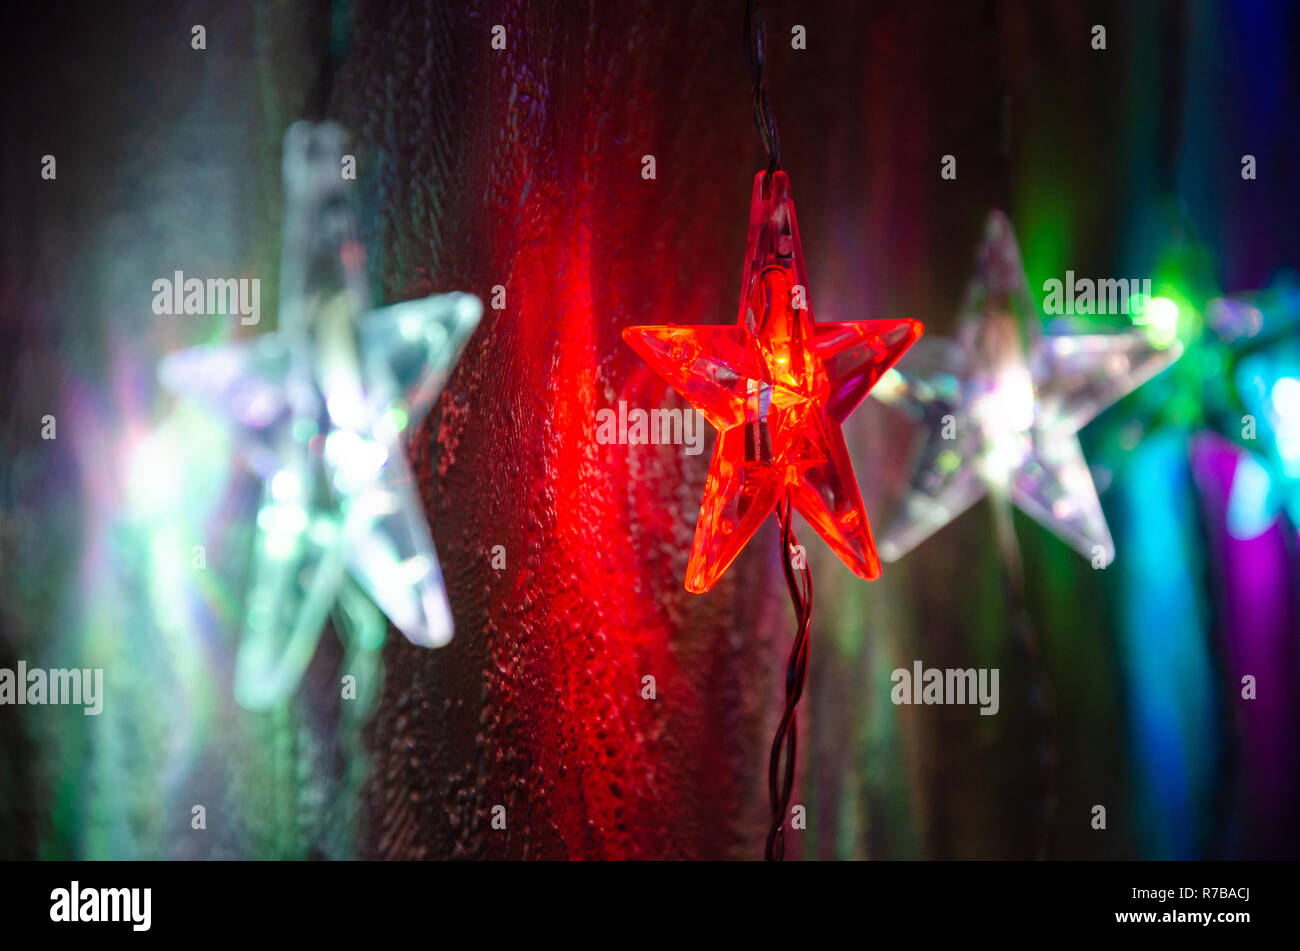 Colourful, festive star shaped Christmas lights glowing in the dark. Stock Photo